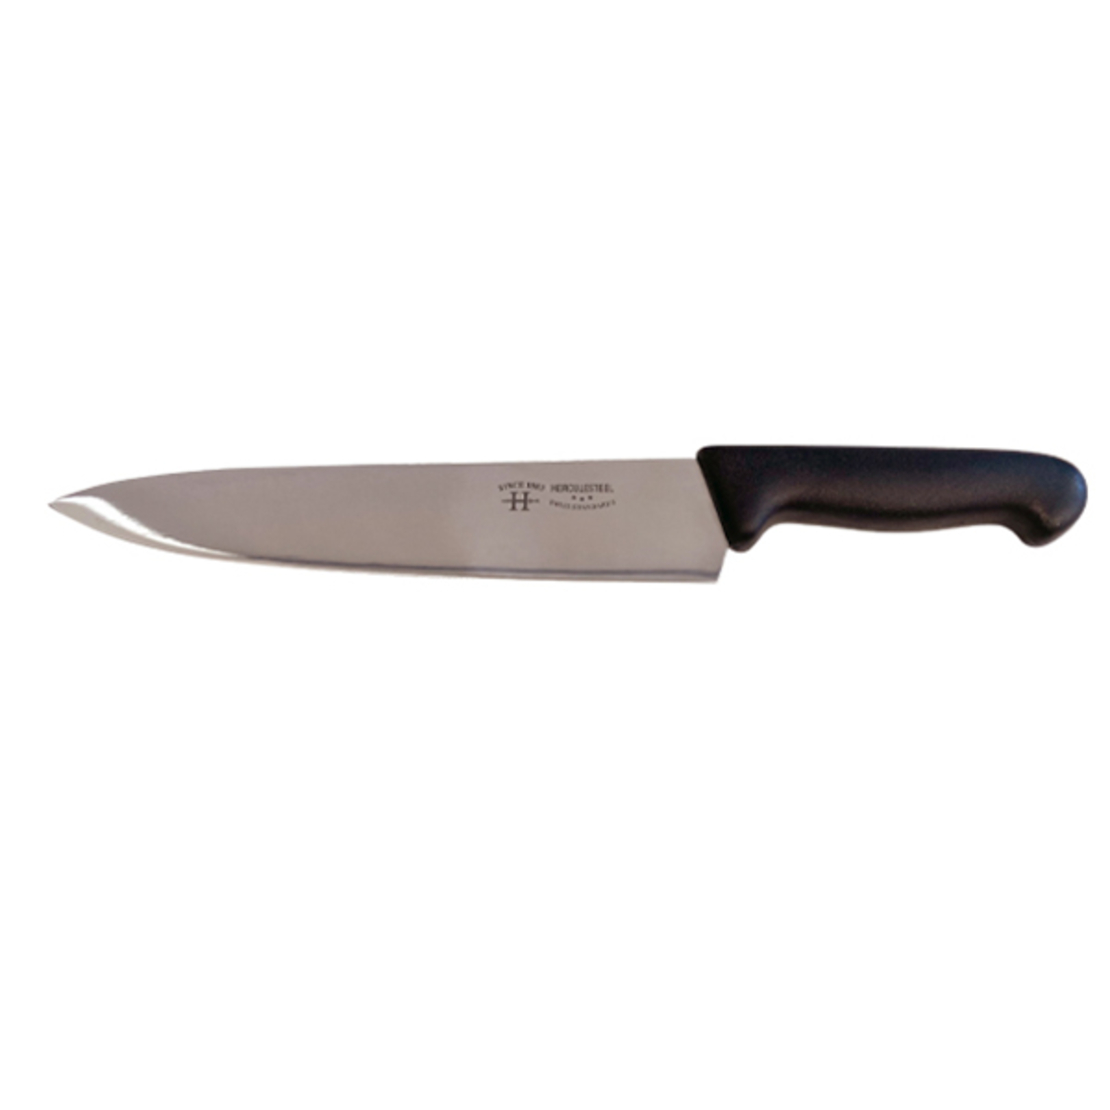 40 cm butcher chef's knife for cutting meat, steaks and vegetables